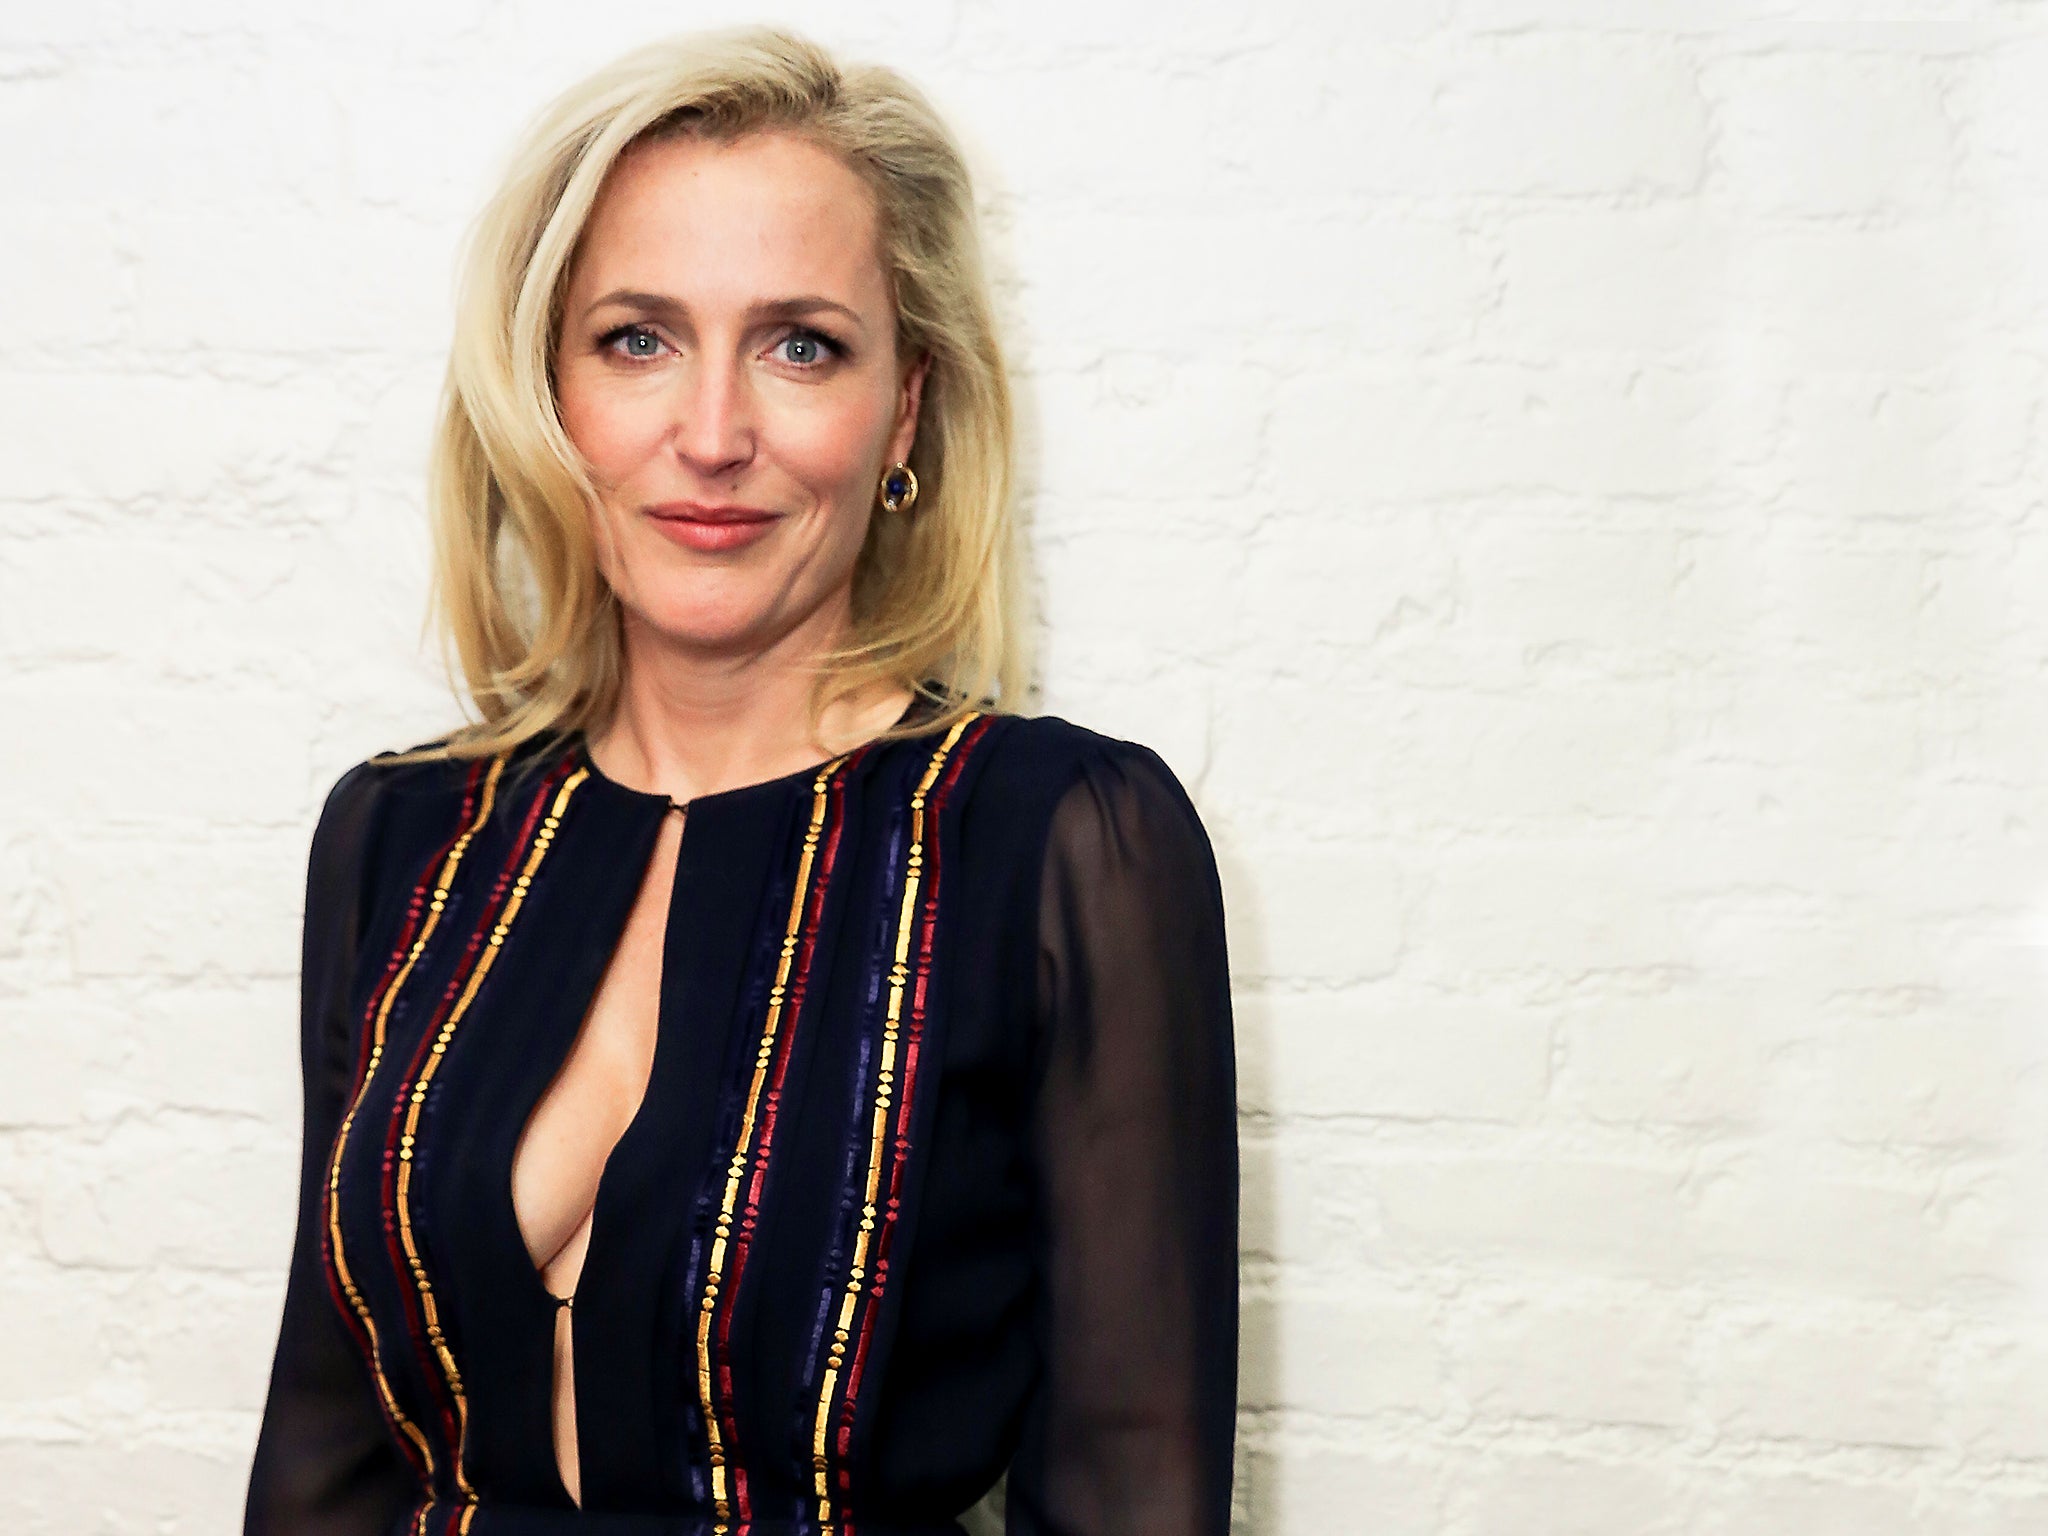 Gillian Anderson is keen to empower women in the continuing struggle against challenges such as the pay gap